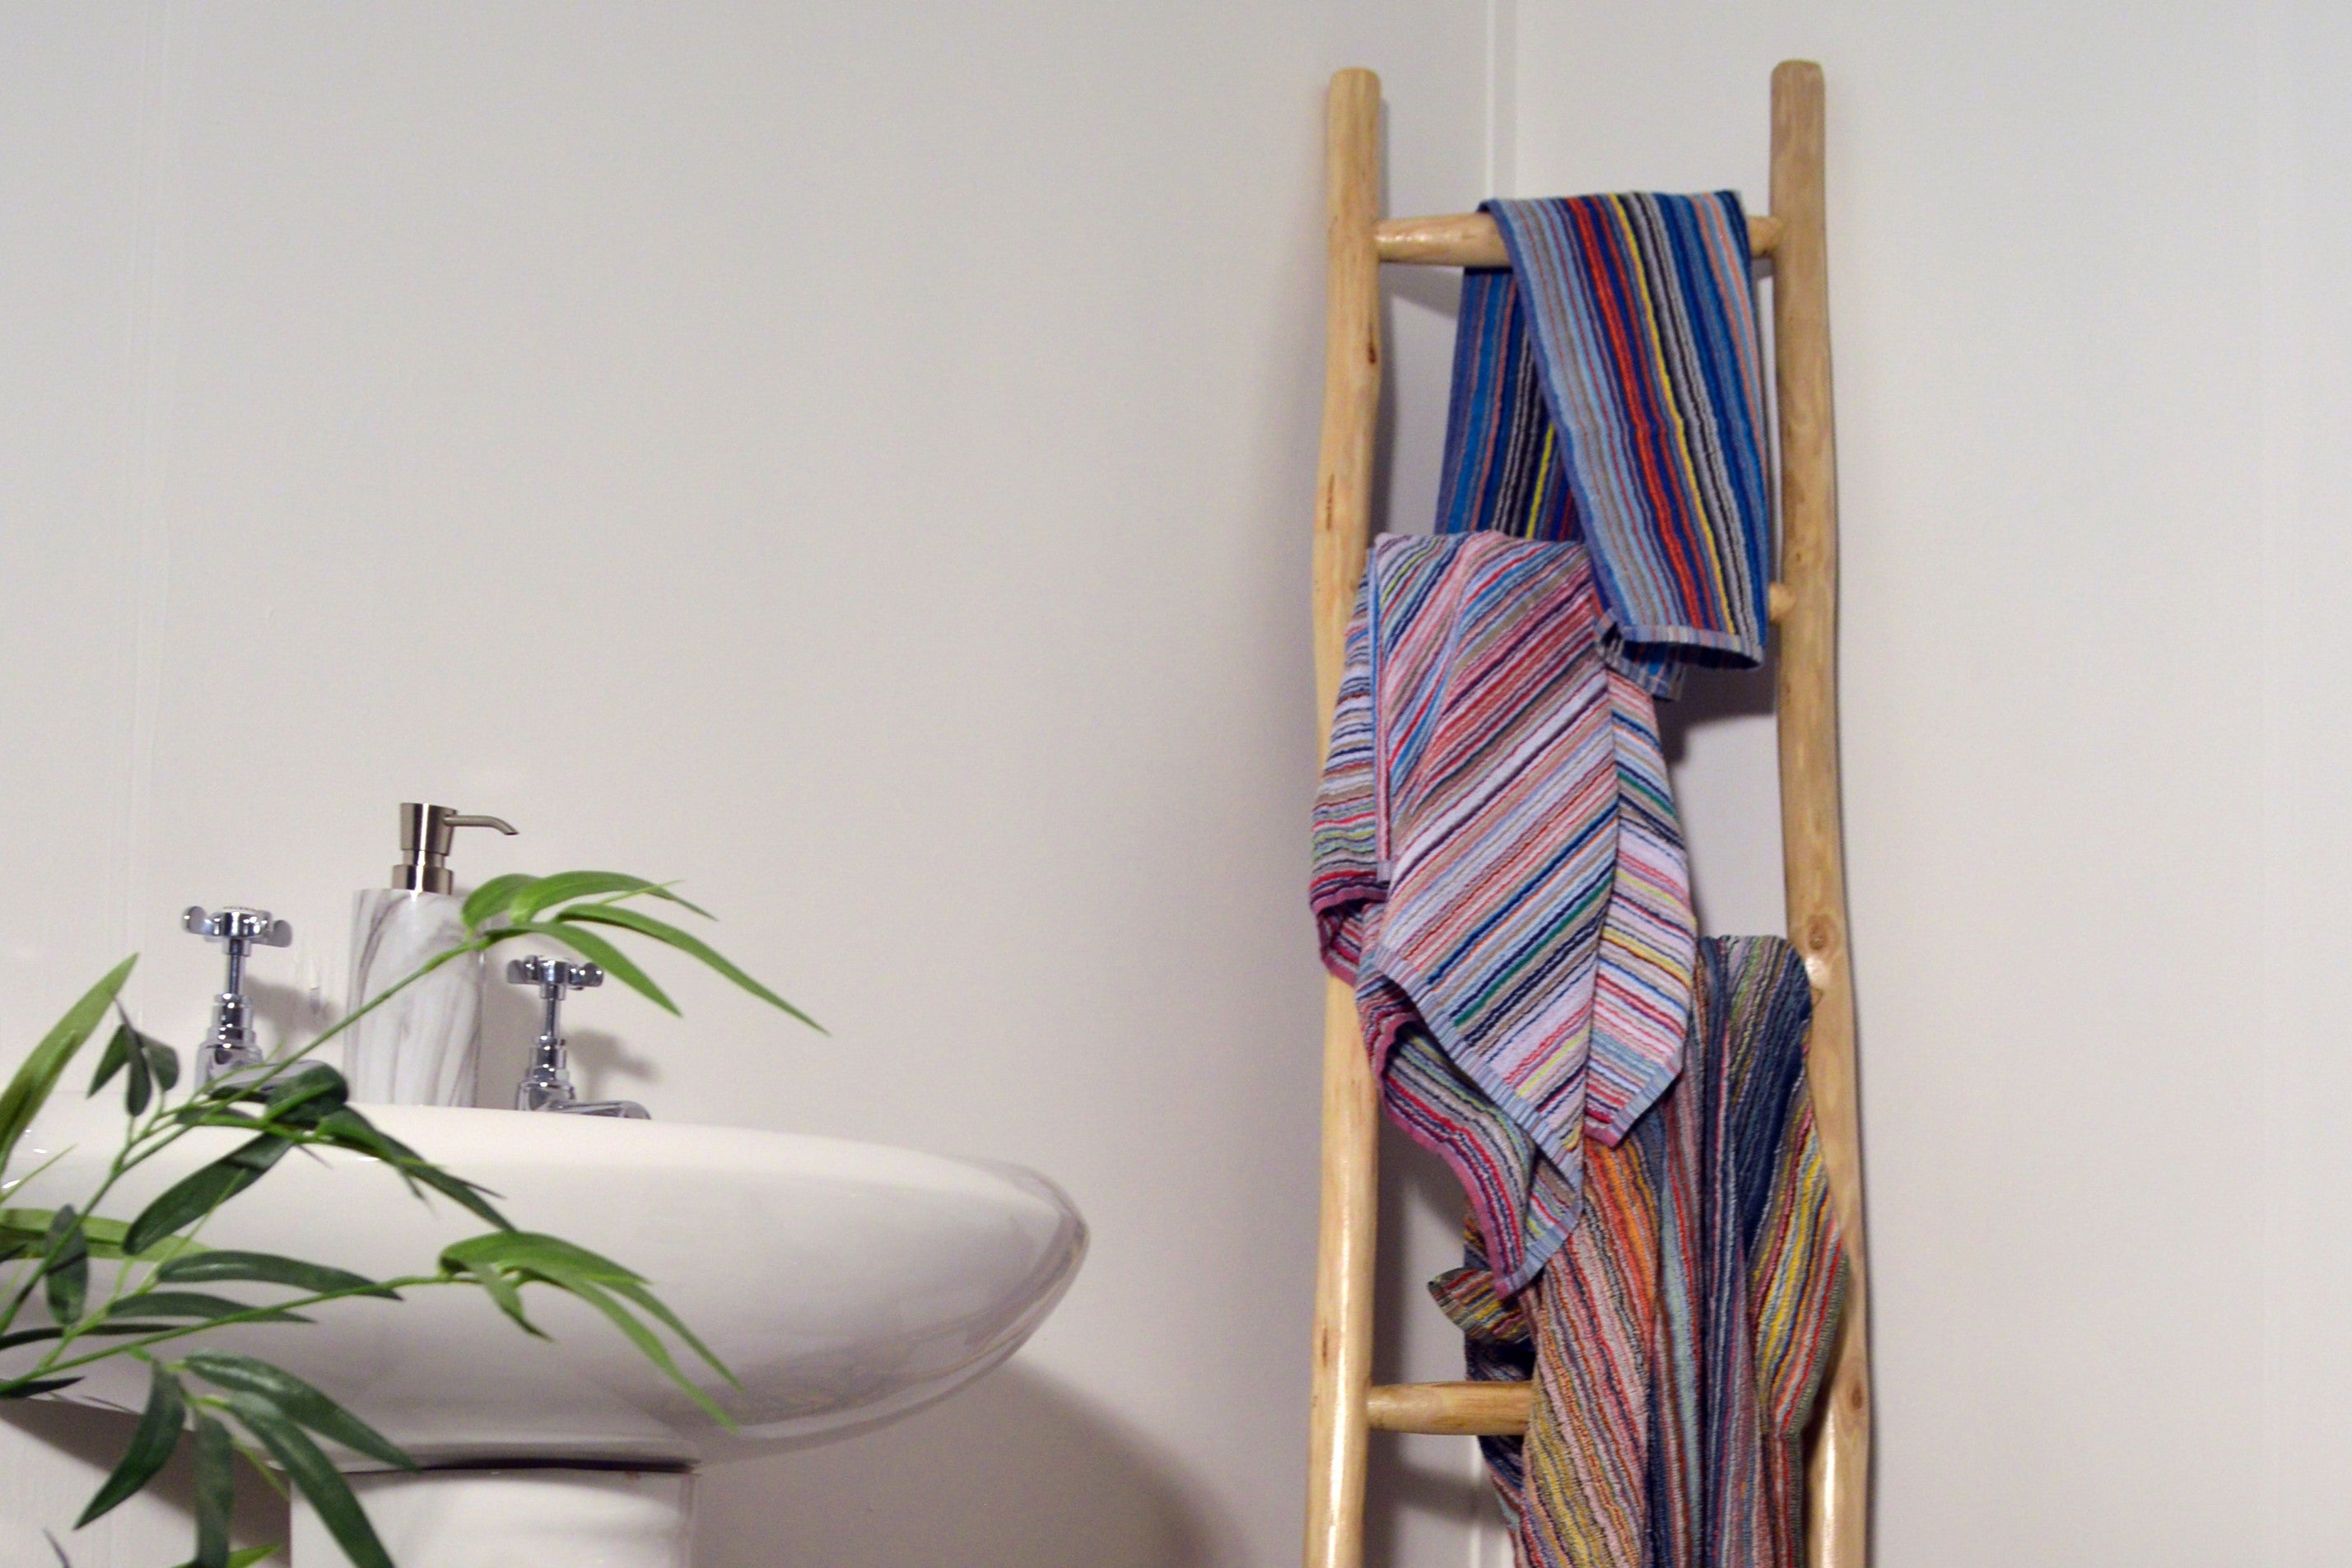 Remnant Yarn Recycled Cotton Towels hung on a ladder in a Bathroom